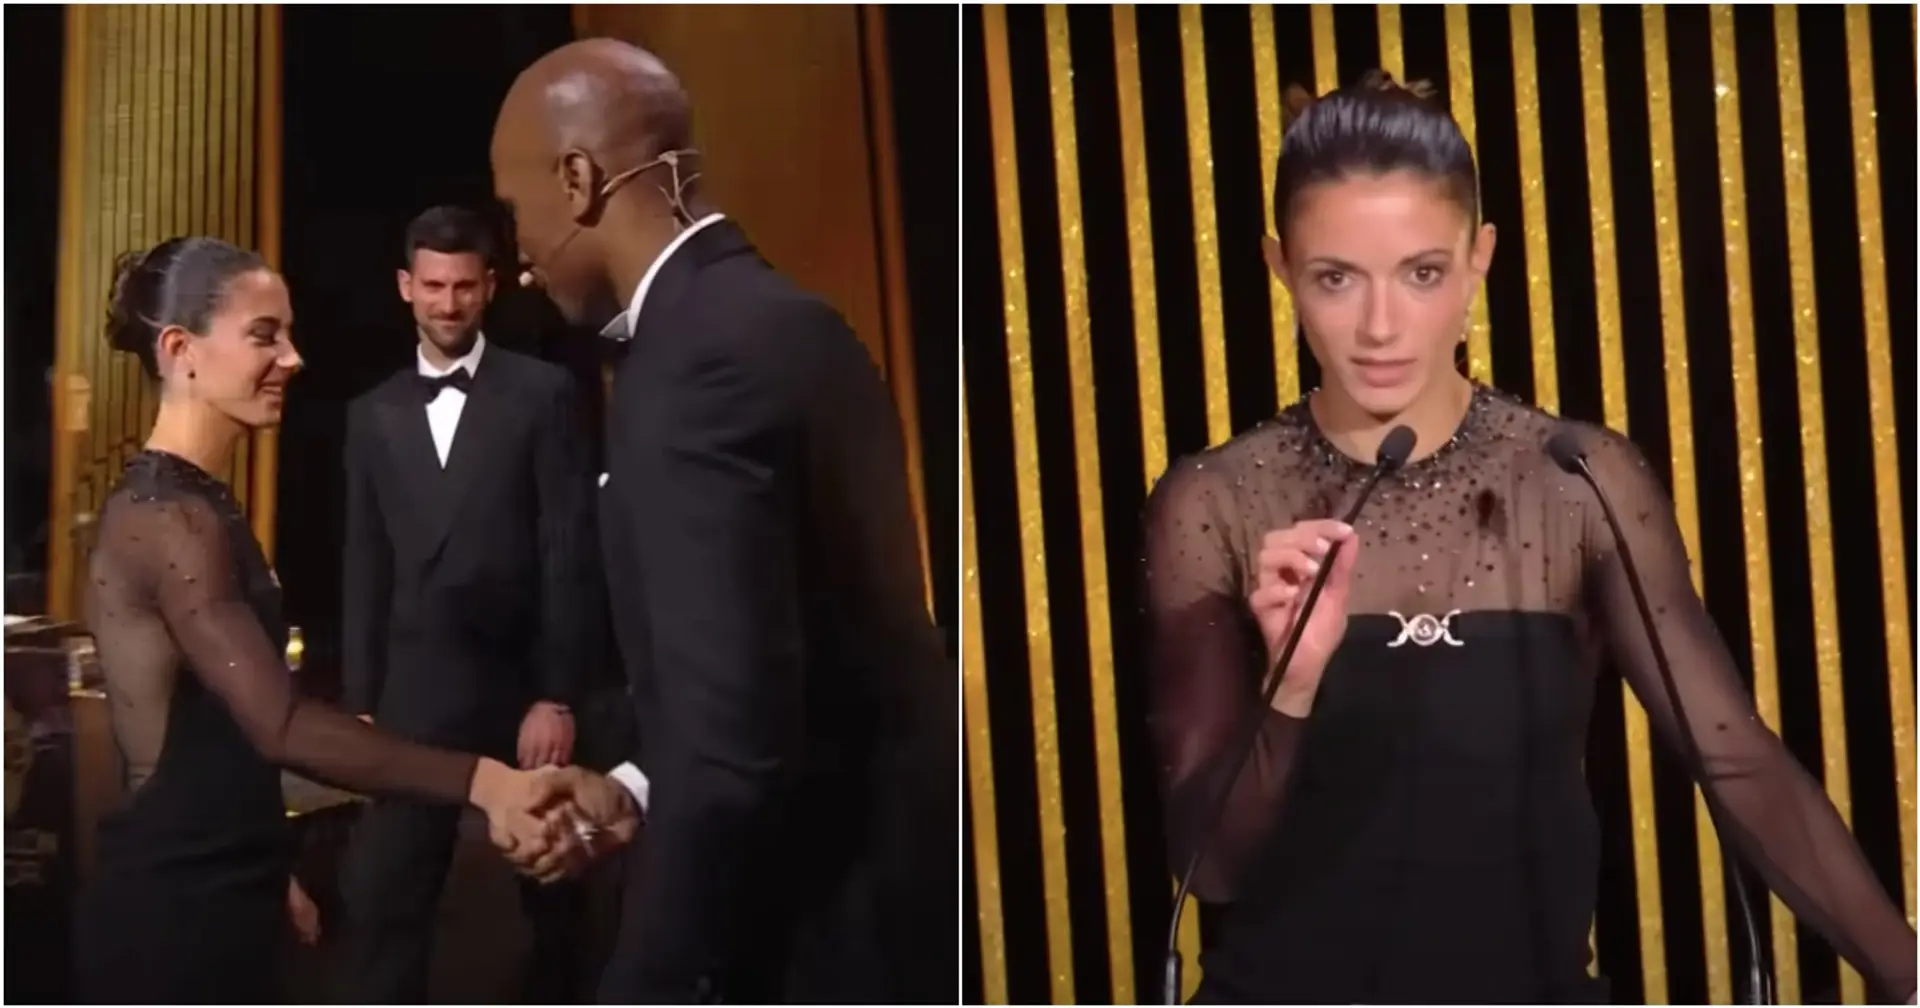 Cules defend Aitana Bonmati for one thing she did in her Ballon d'Or speech - she was criticised for it